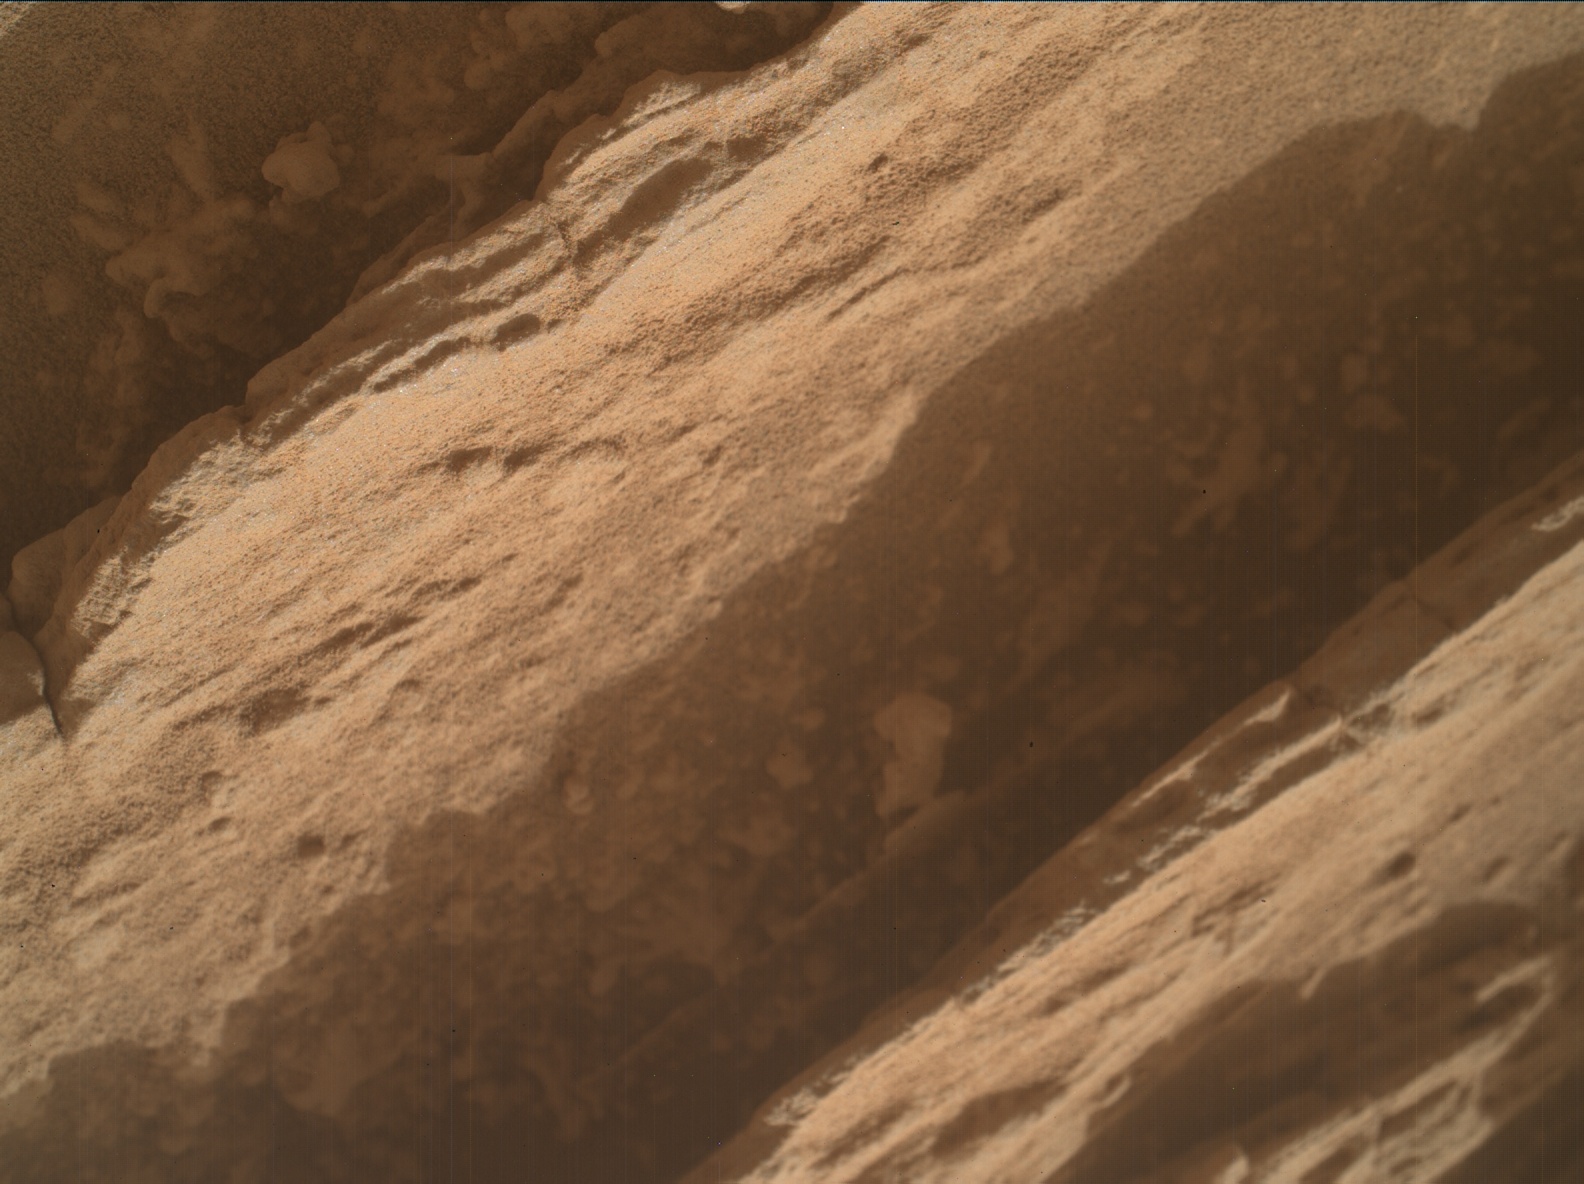 Nasa's Mars rover Curiosity acquired this image using its Mars Hand Lens Imager (MAHLI) on Sol 3493